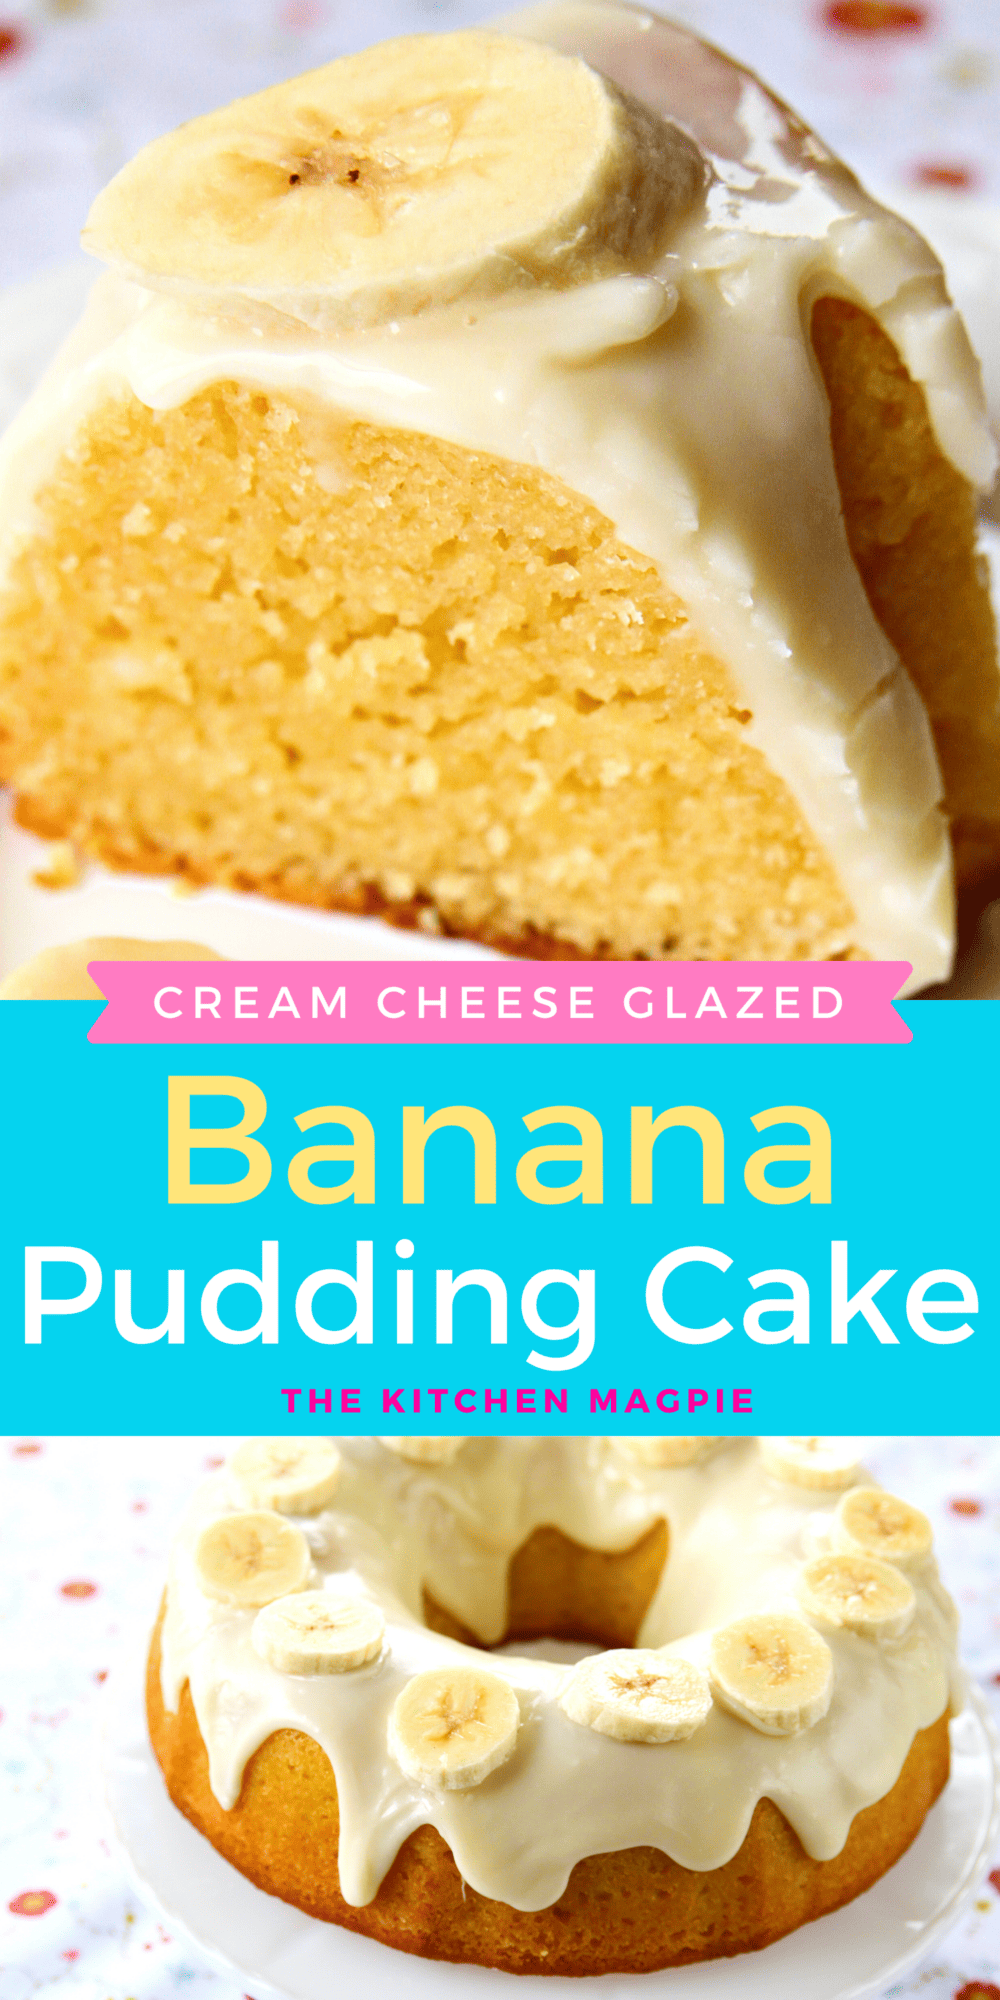 This banana pudding cake is topped with a decadent cream cheese glaze and is the best banana cake you will ever make!